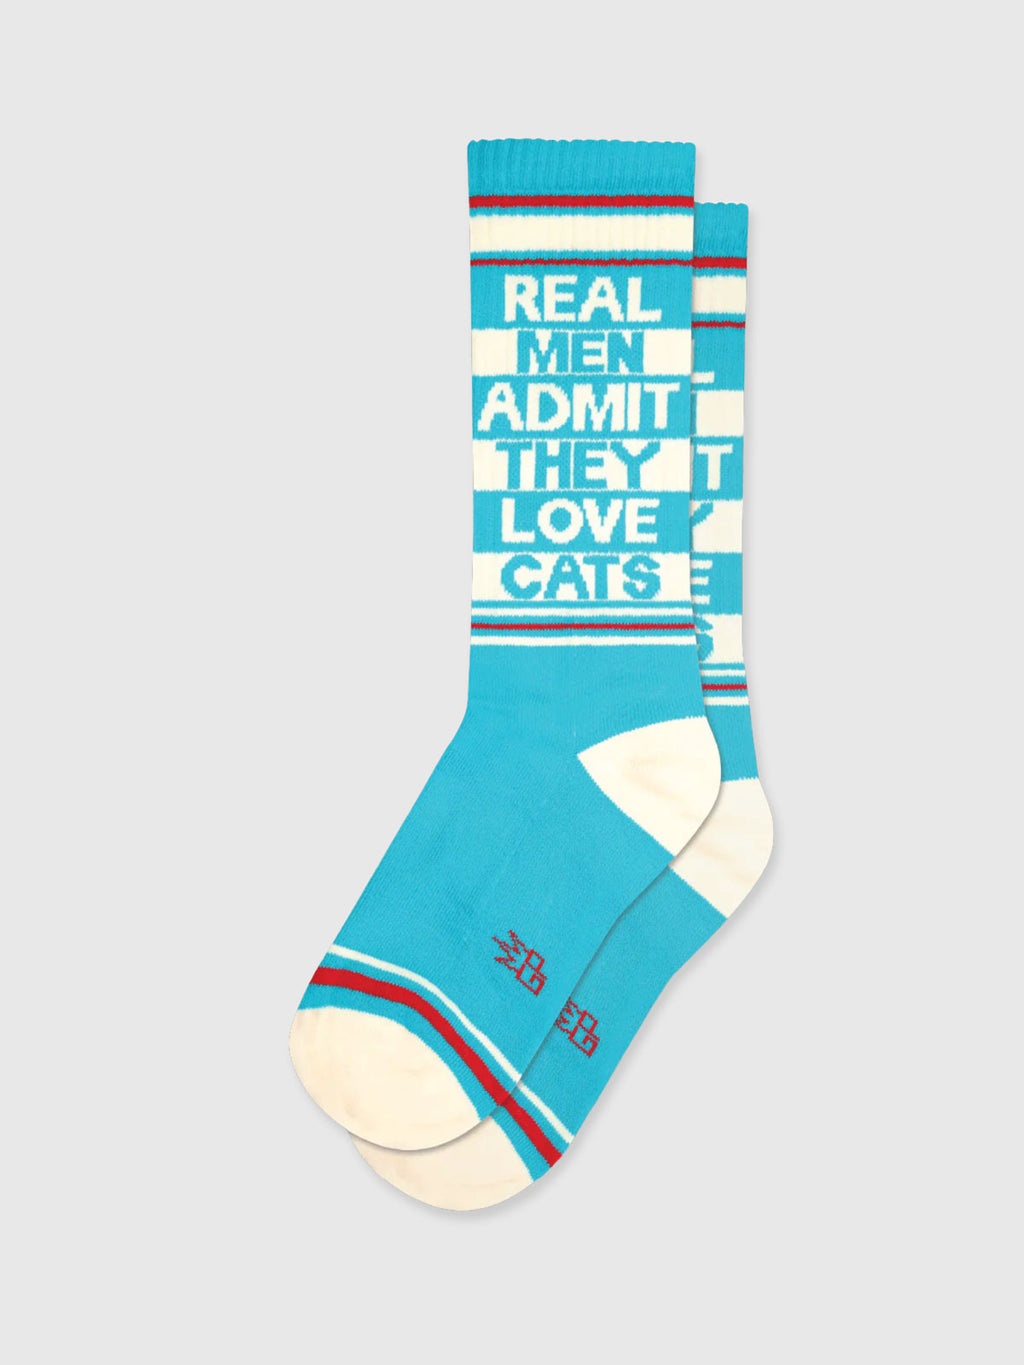 Gumball Poodle - Real Men Admit They Love Cats Socks